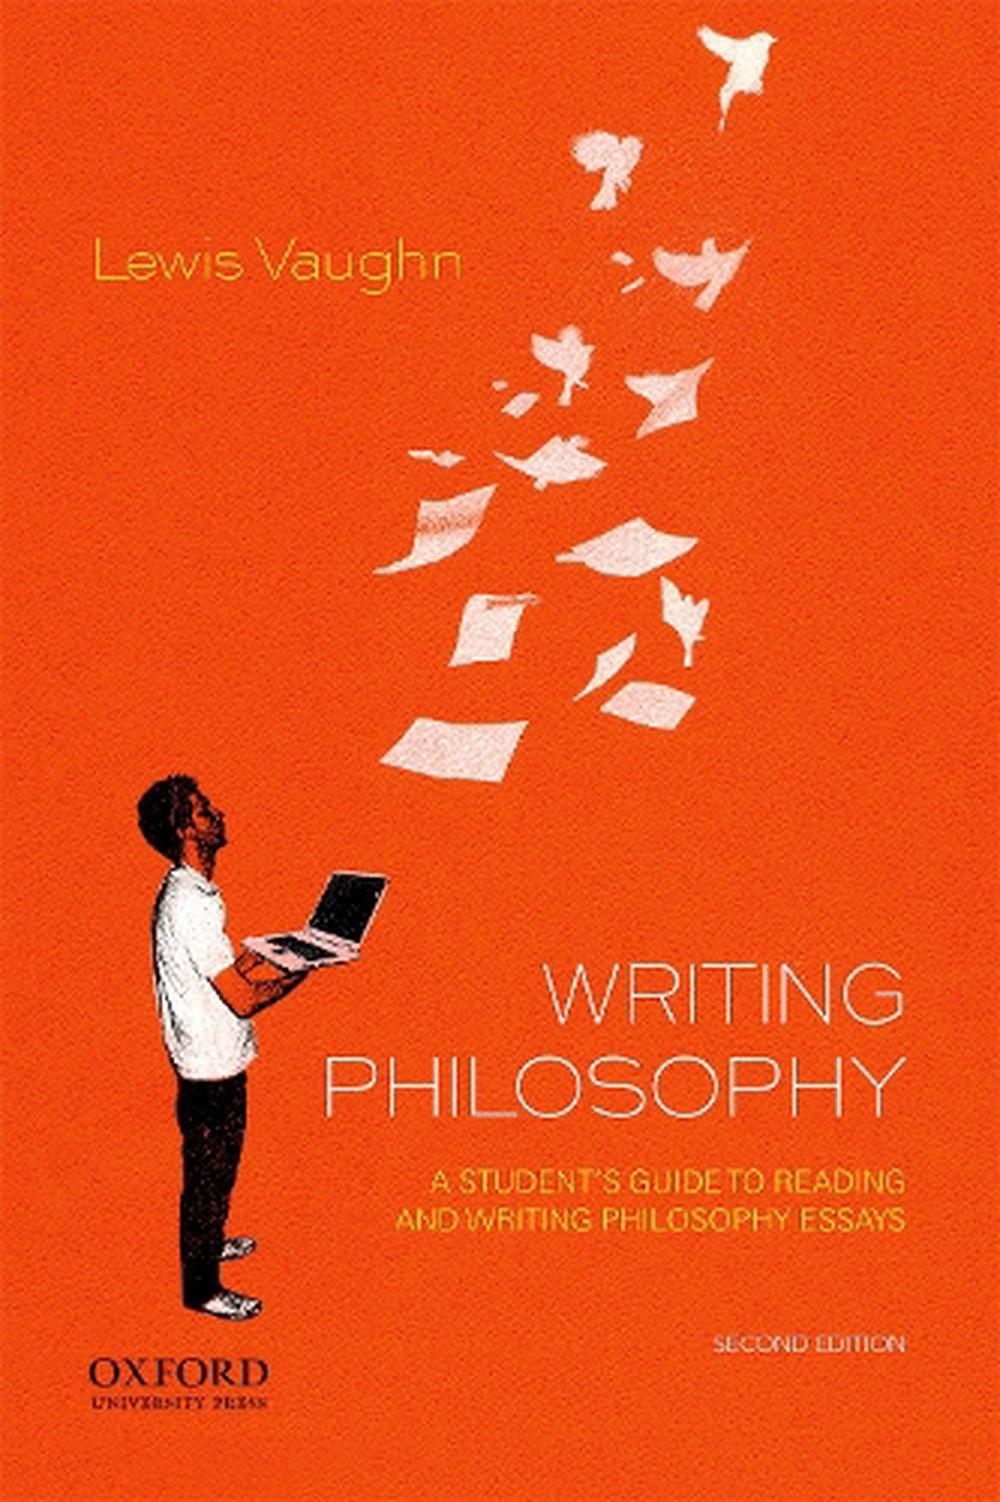 writing philosophy a student's guide to writing philosophy essays pdf